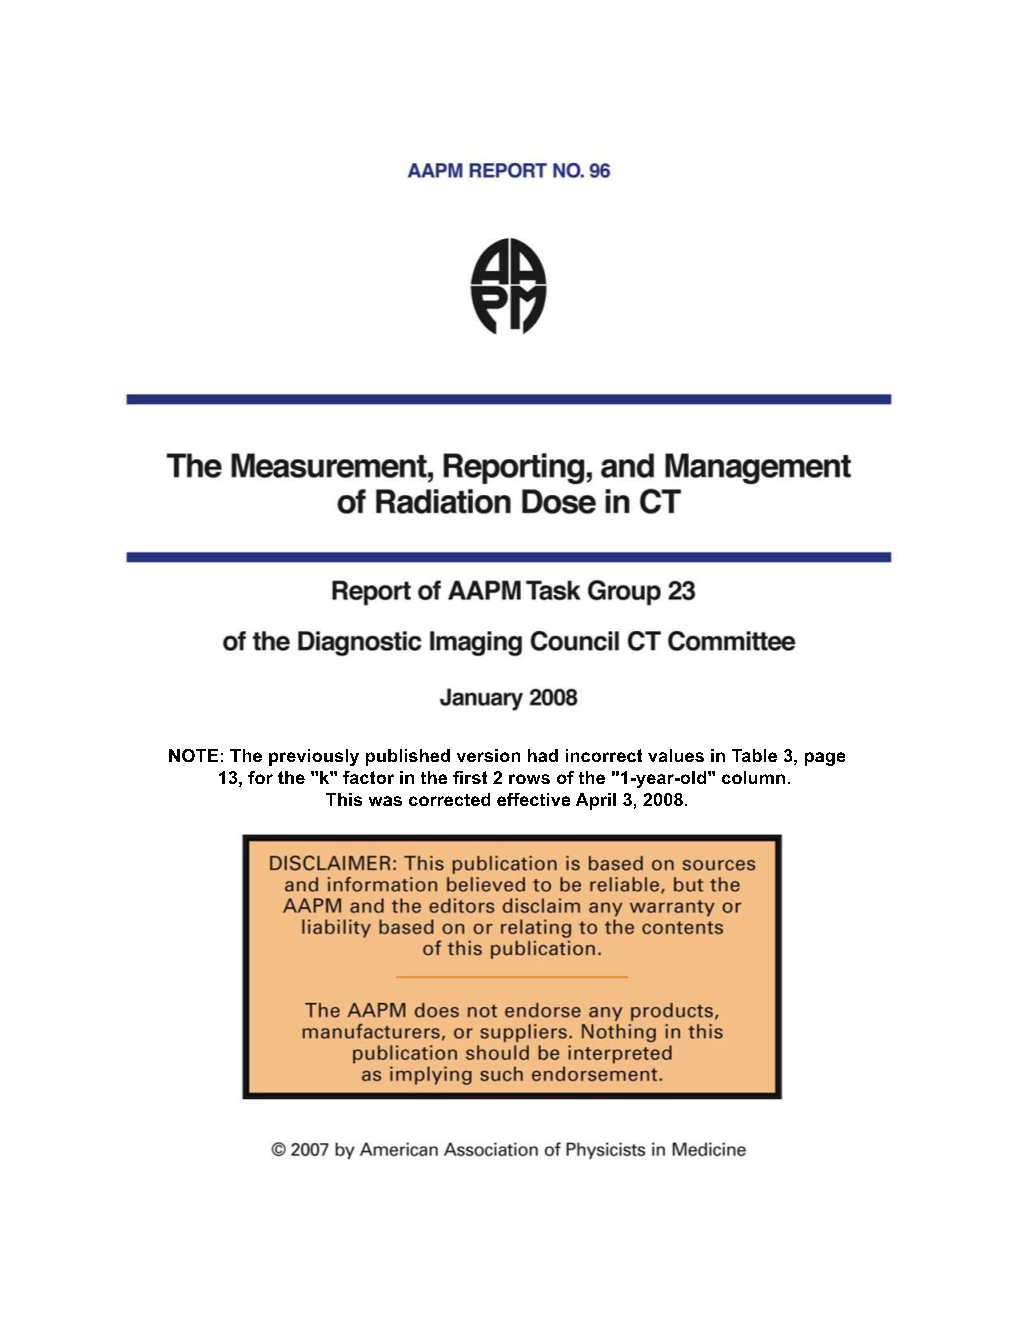 The Measurement, Reporting, and Management of Radiation Dose in CT